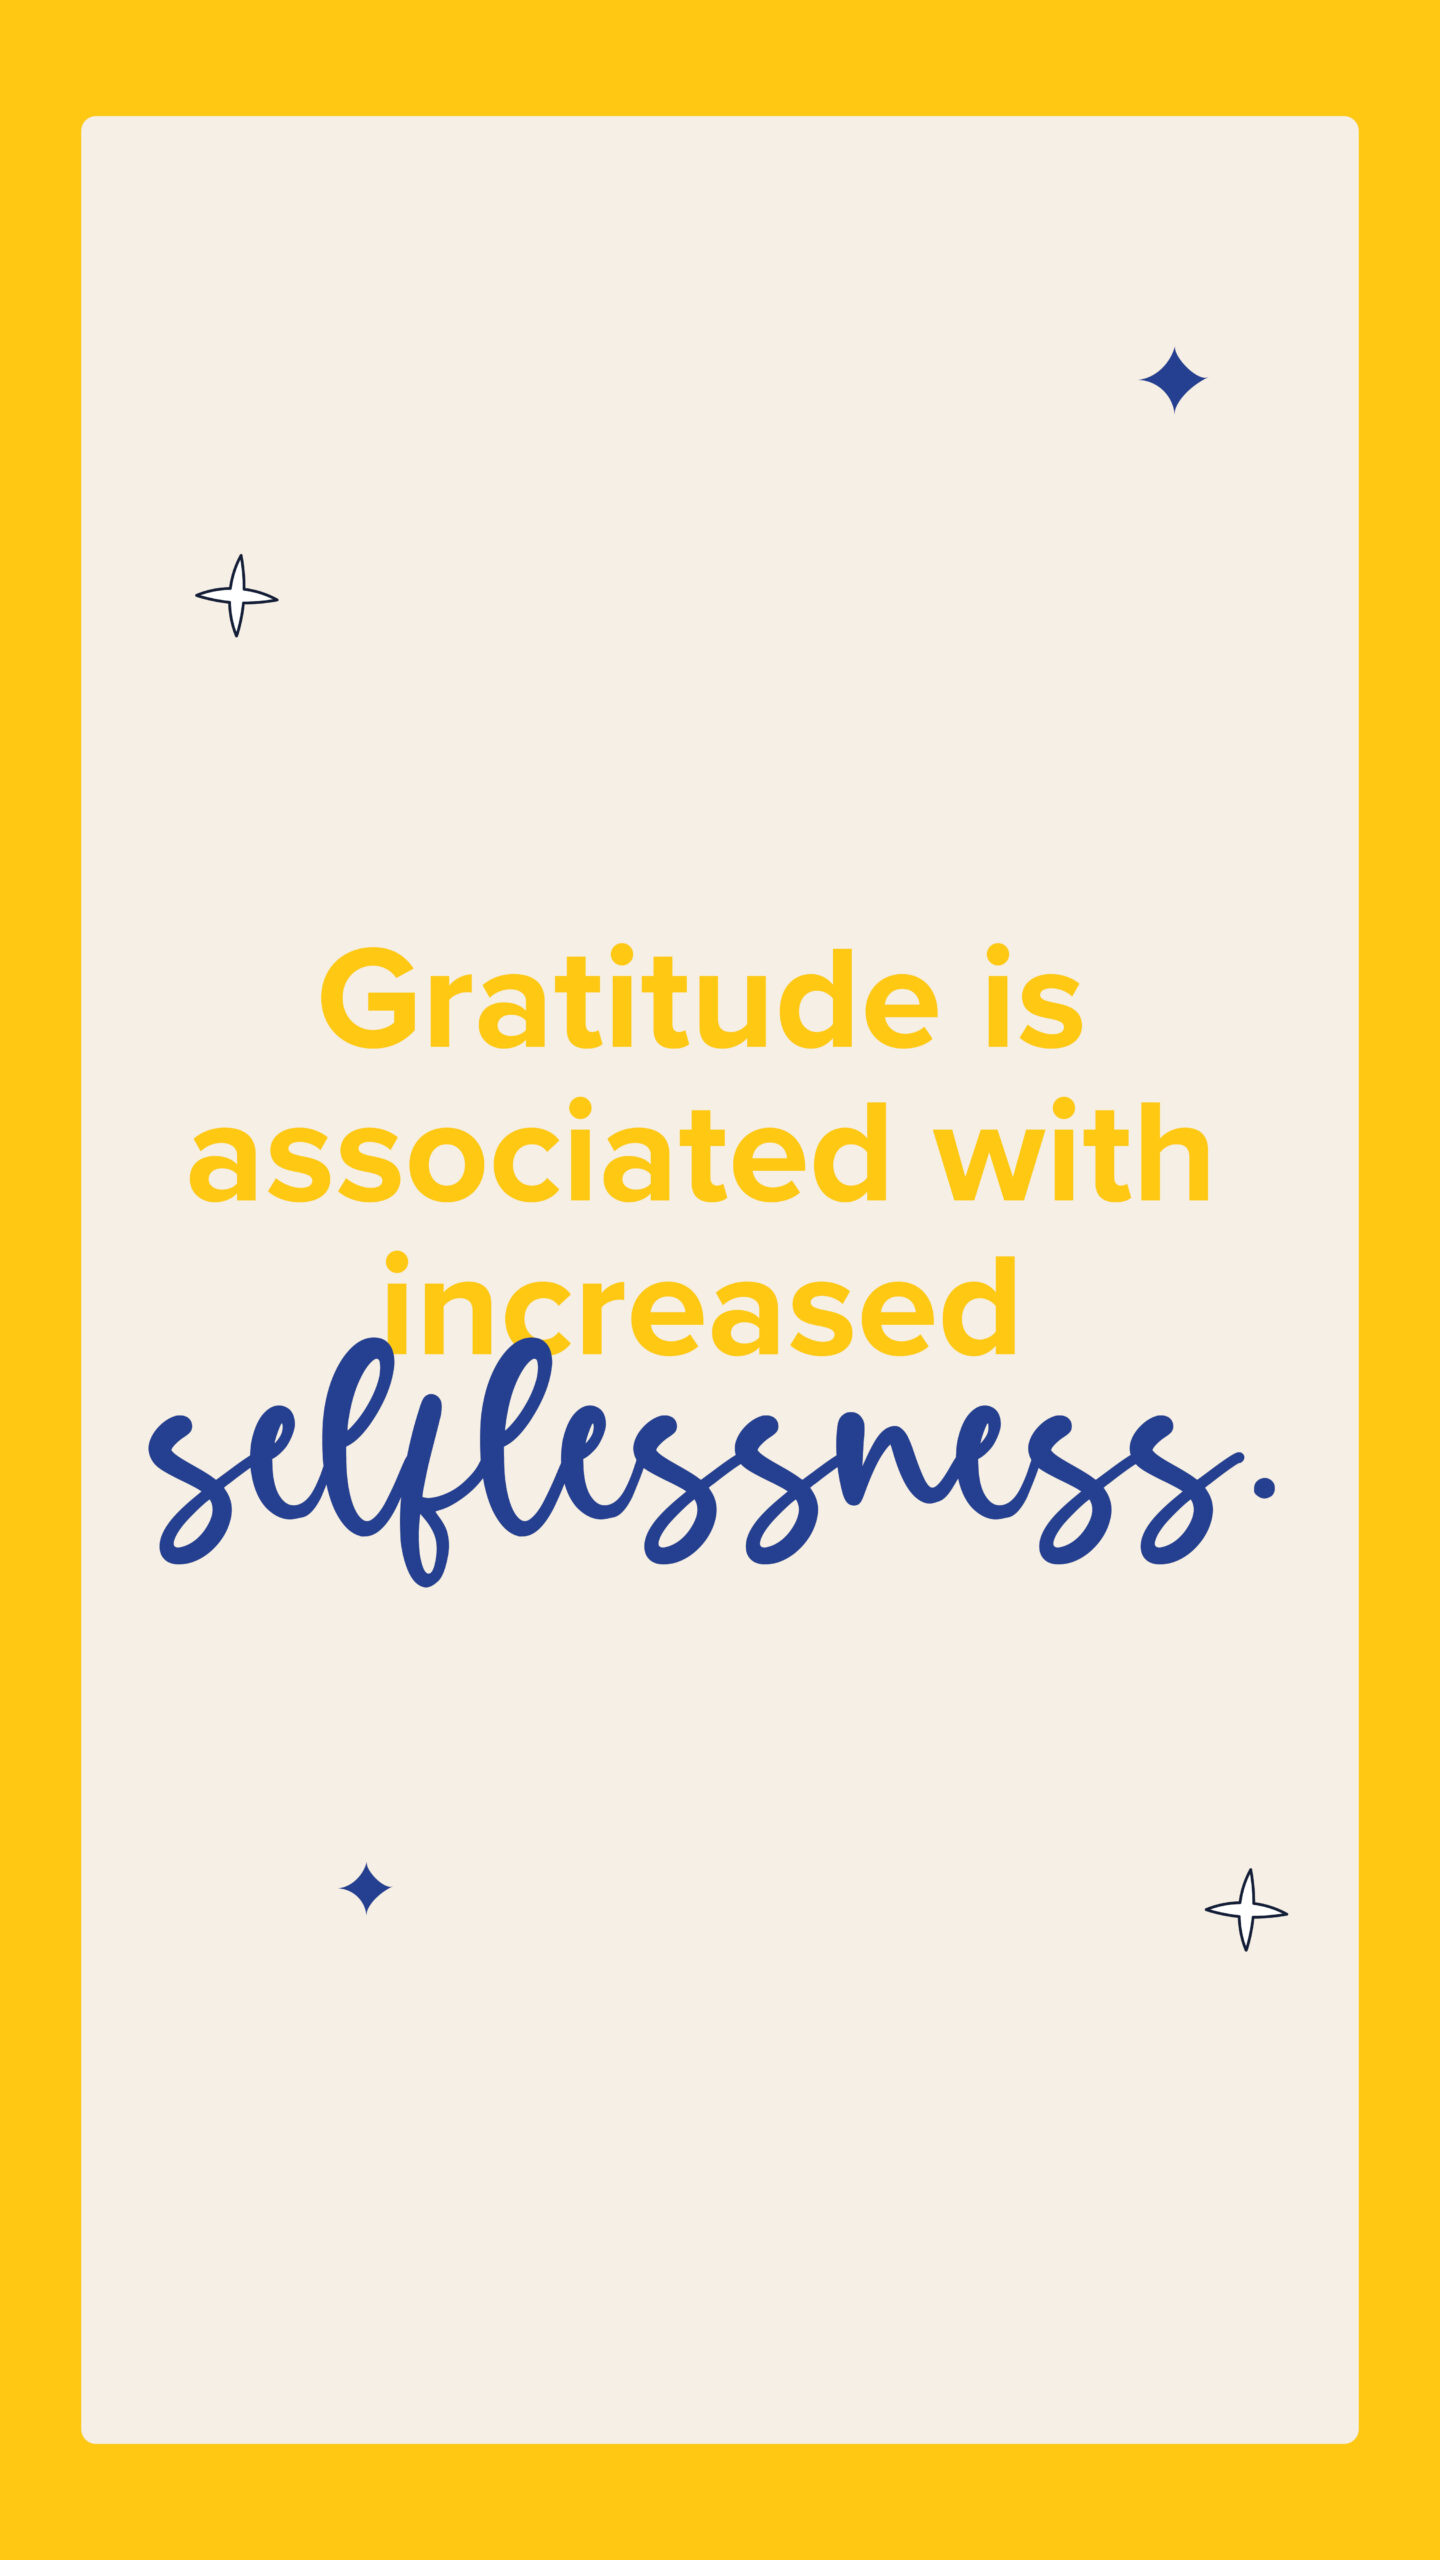 Gratitude is associated with increased selflessness graphics